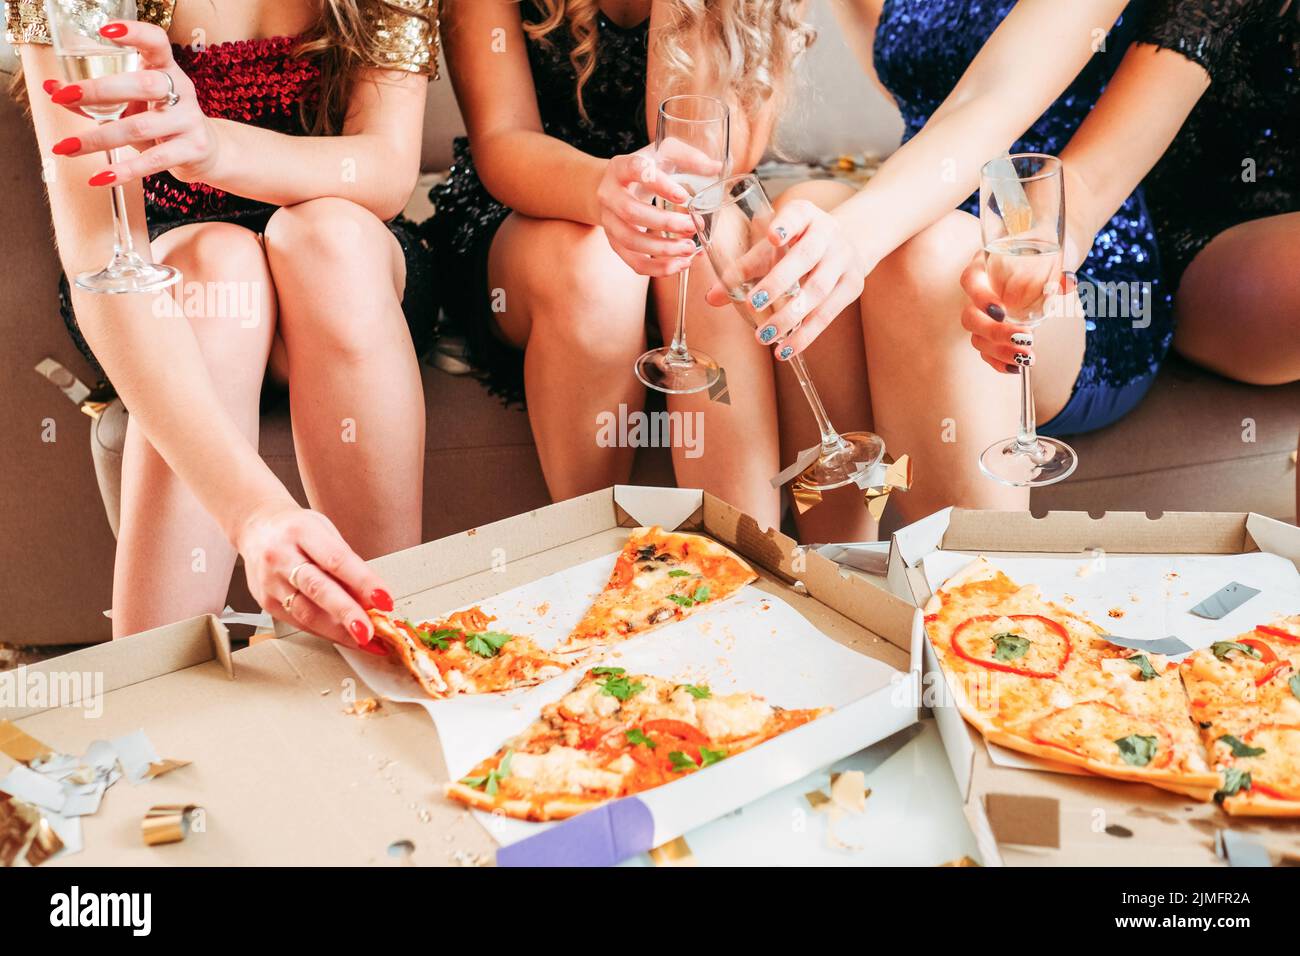 Fancy Party girls Pizza Champagner Hangout Stockfoto